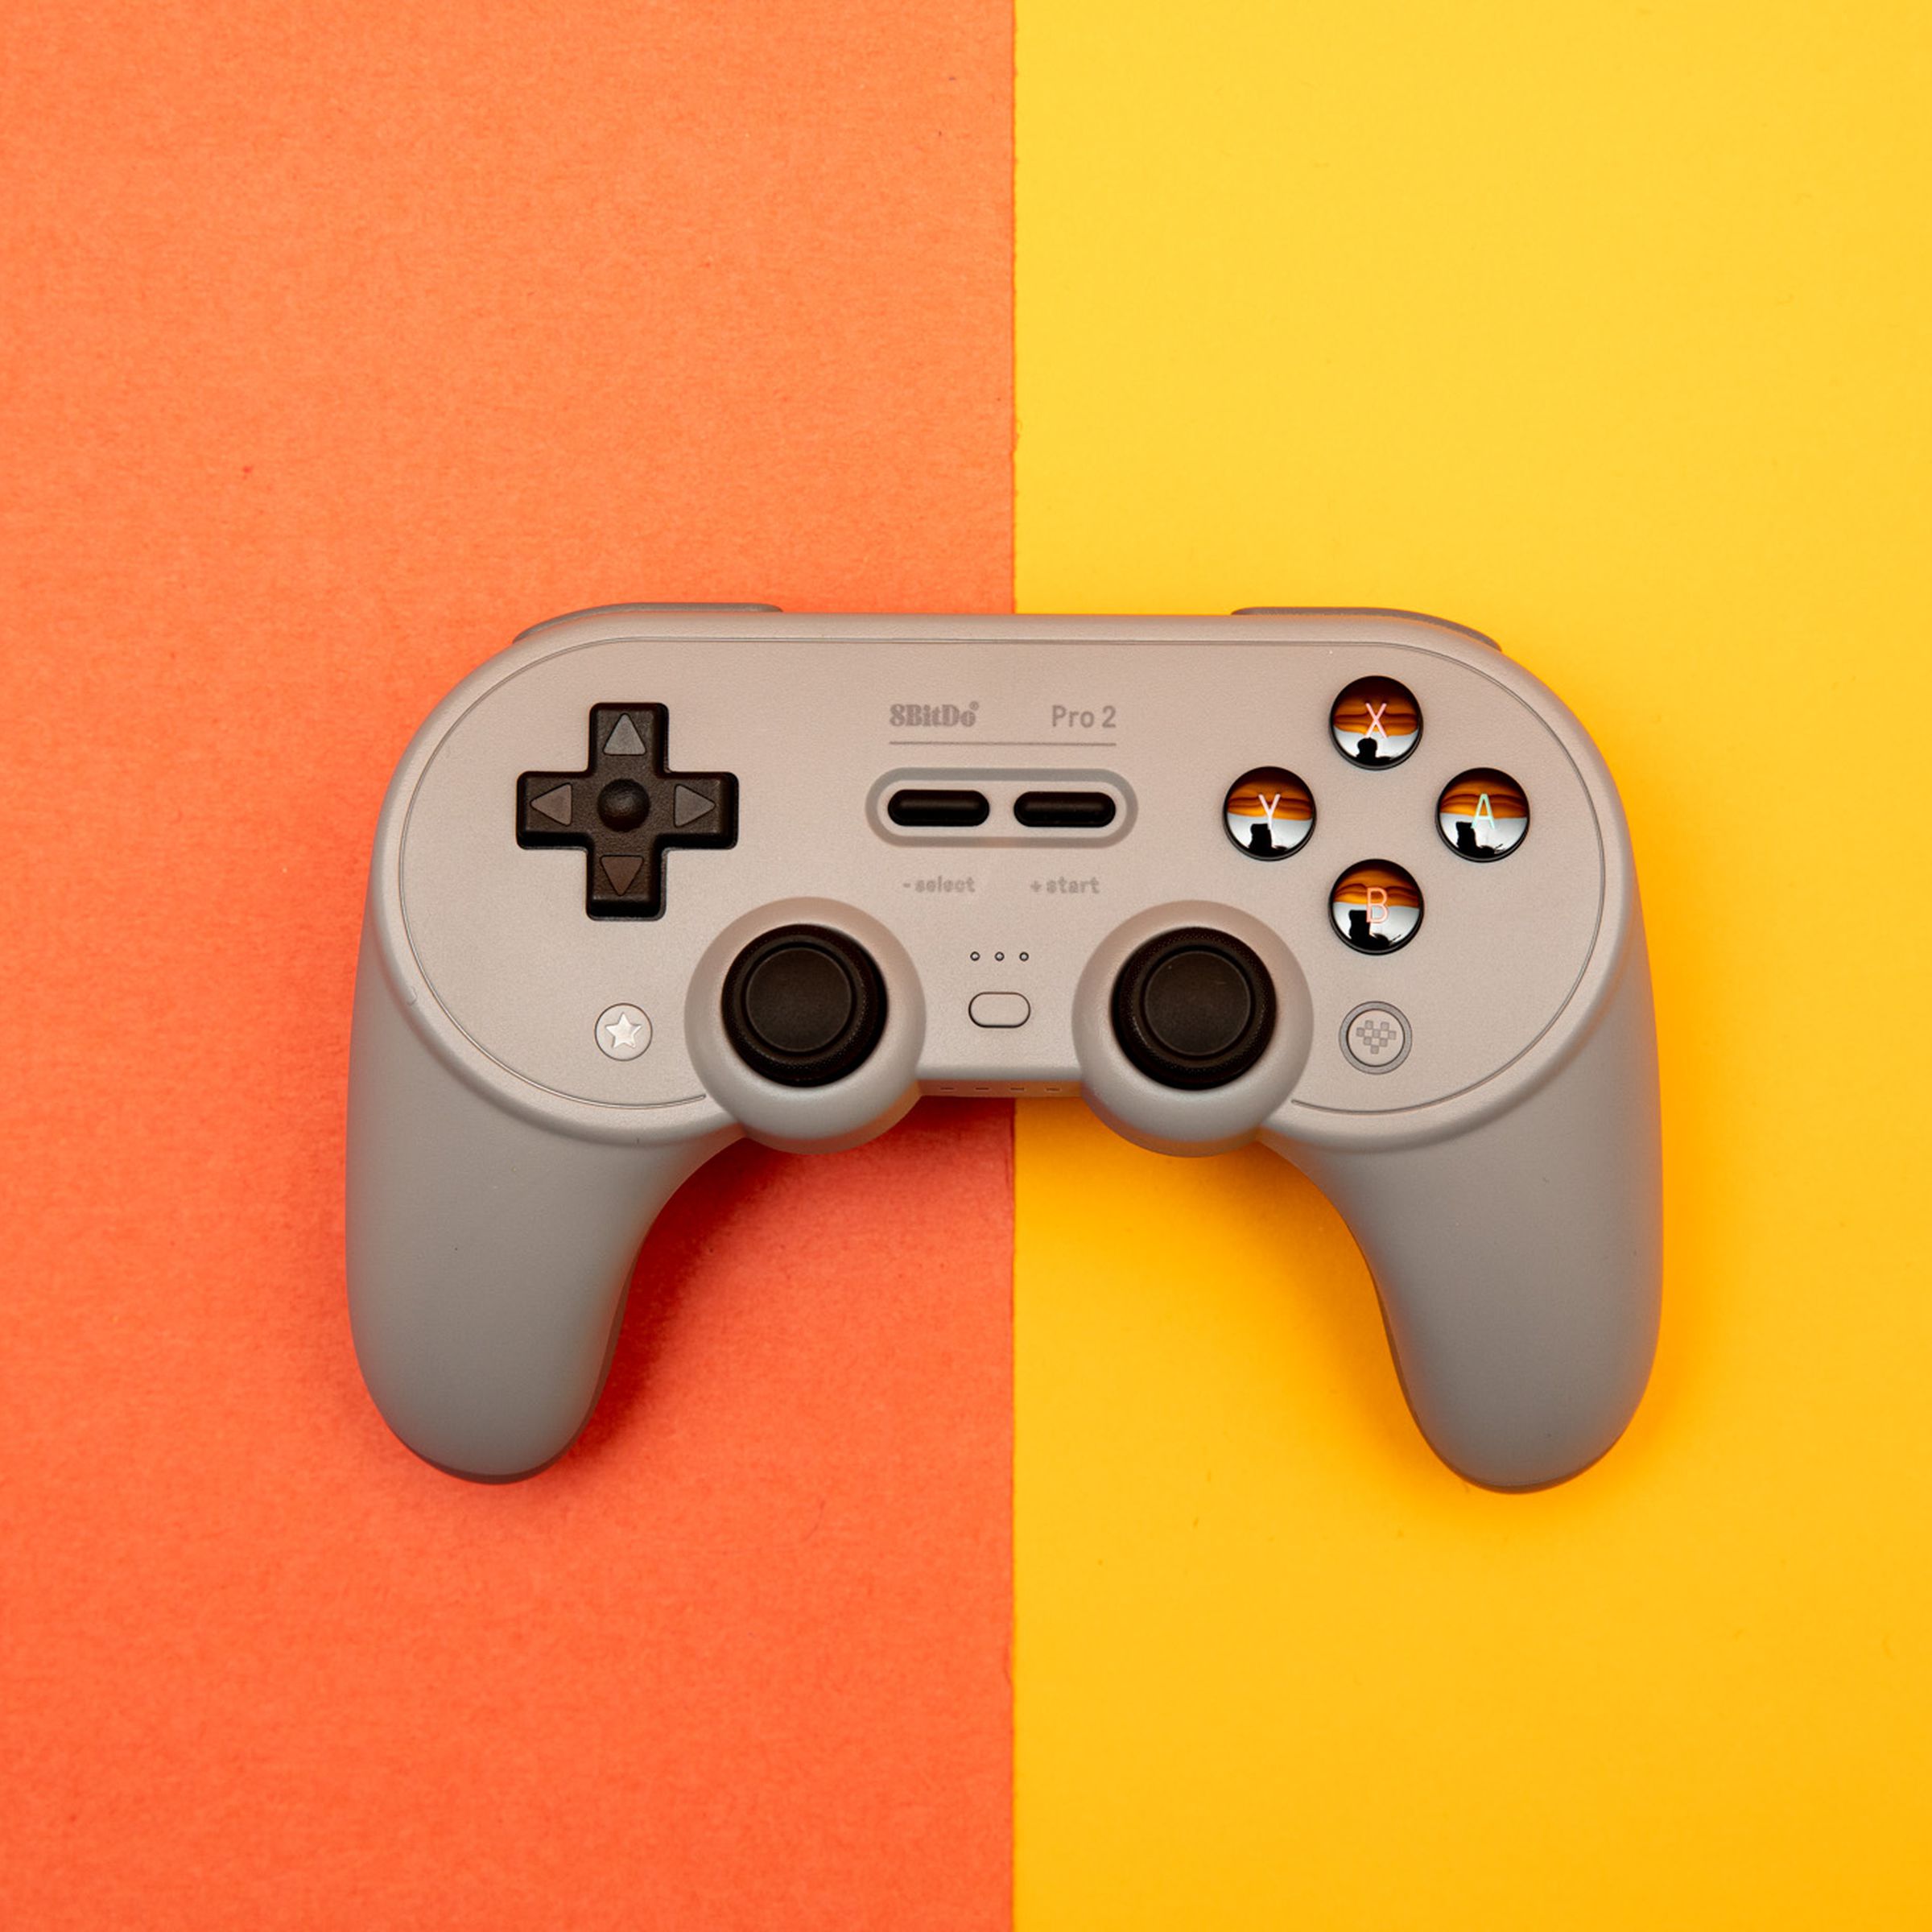 The 8BitDo Pro 2 wireless controller for the Nintendo Switch and other platforms sitting on a two-toned backdrop.